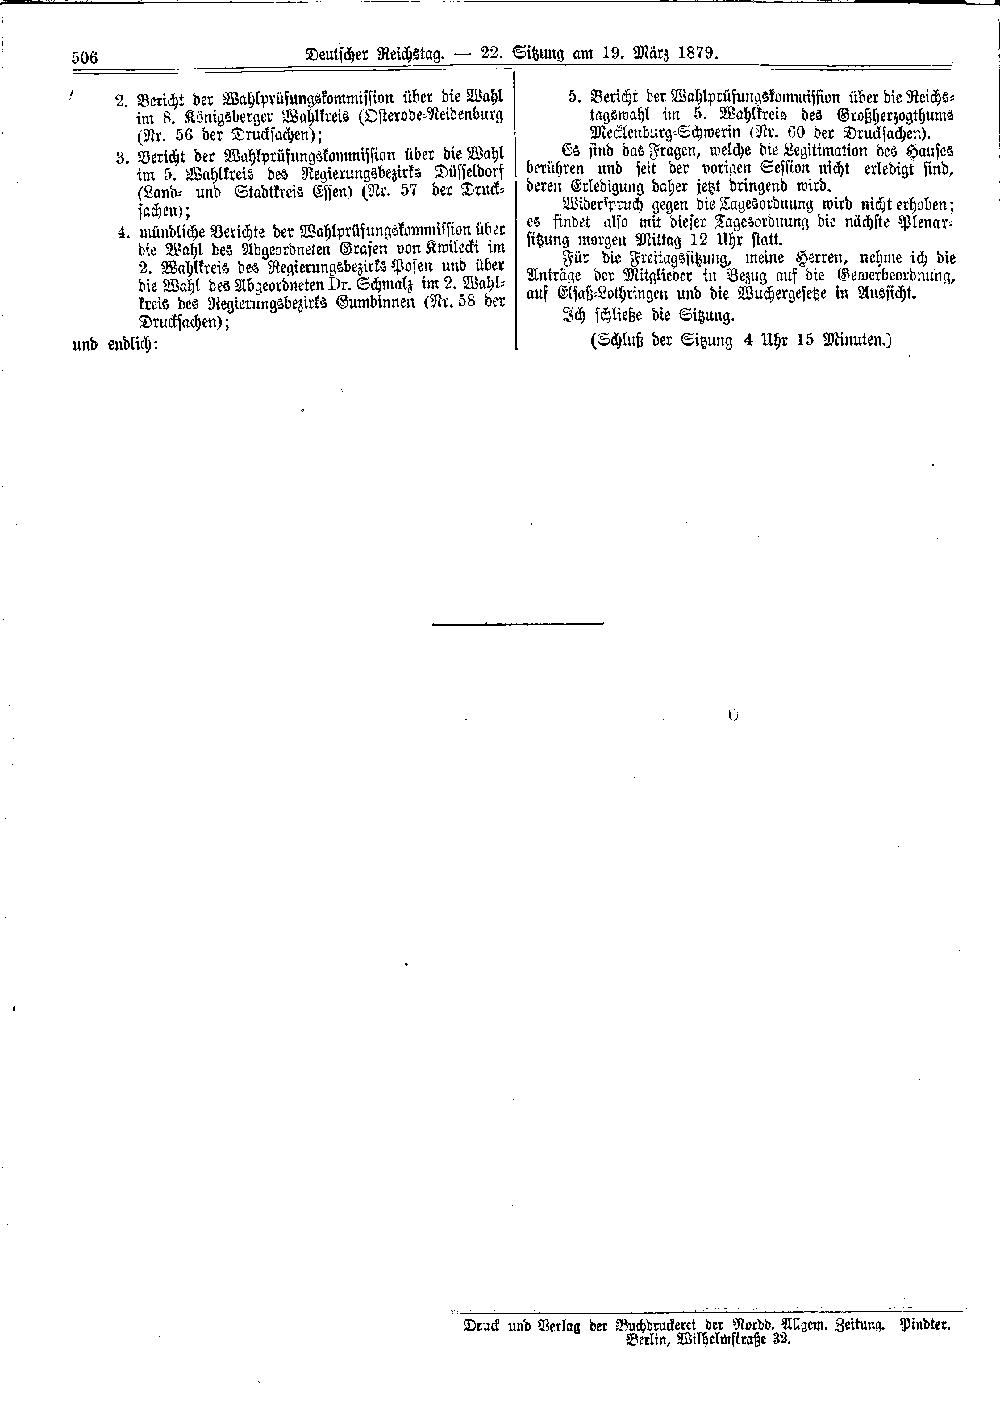 Scan of page 506